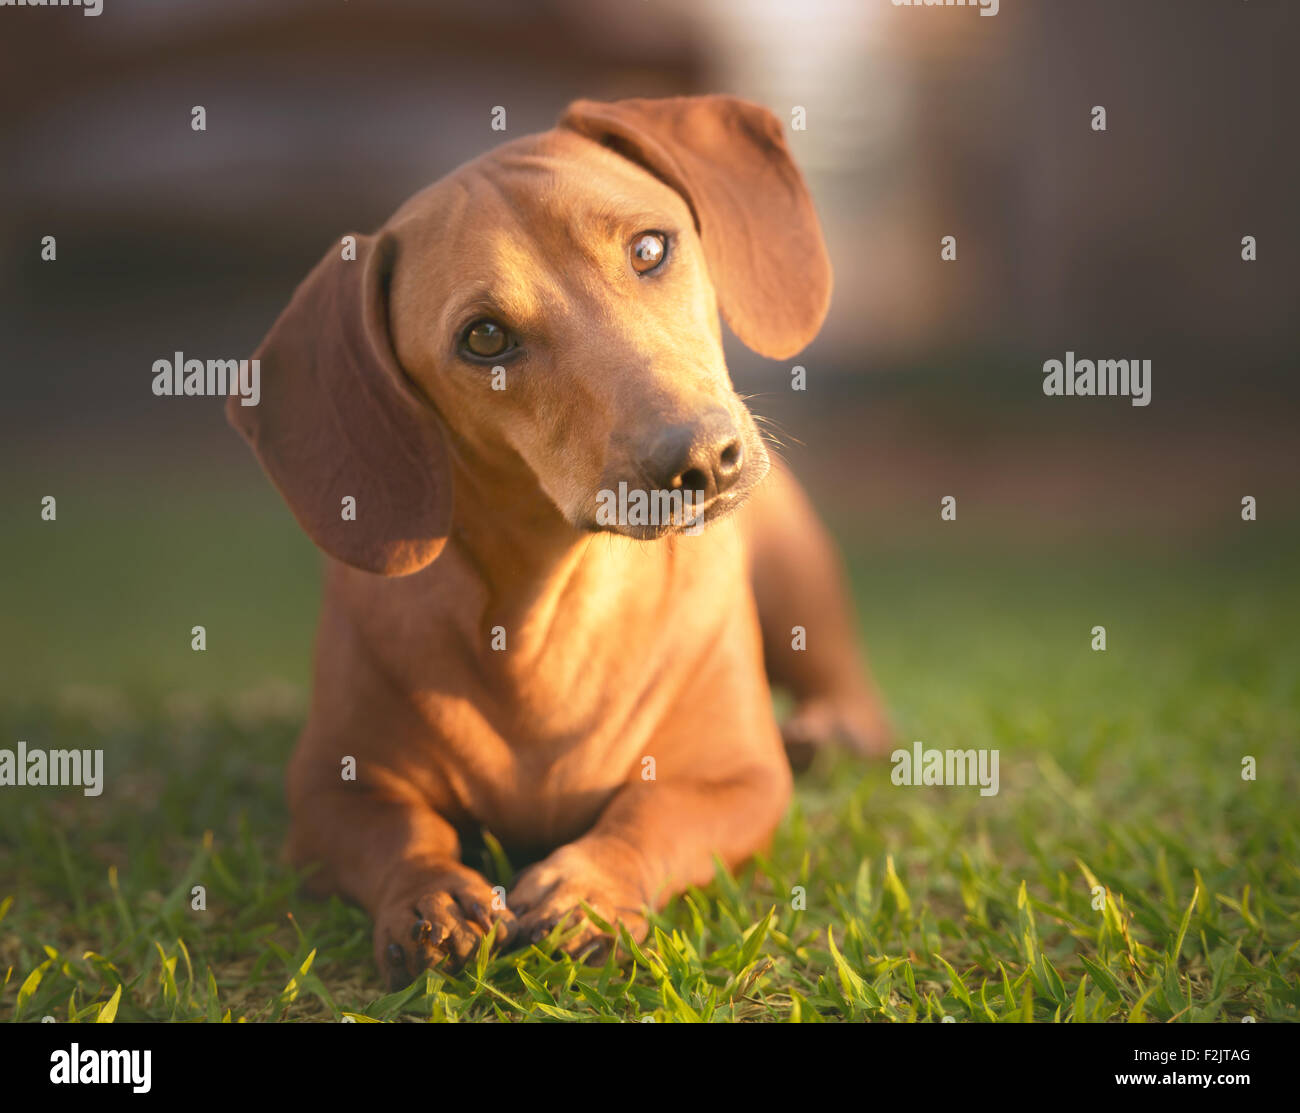 Dog in the grass under sunset looking at the camera. Stock Photo